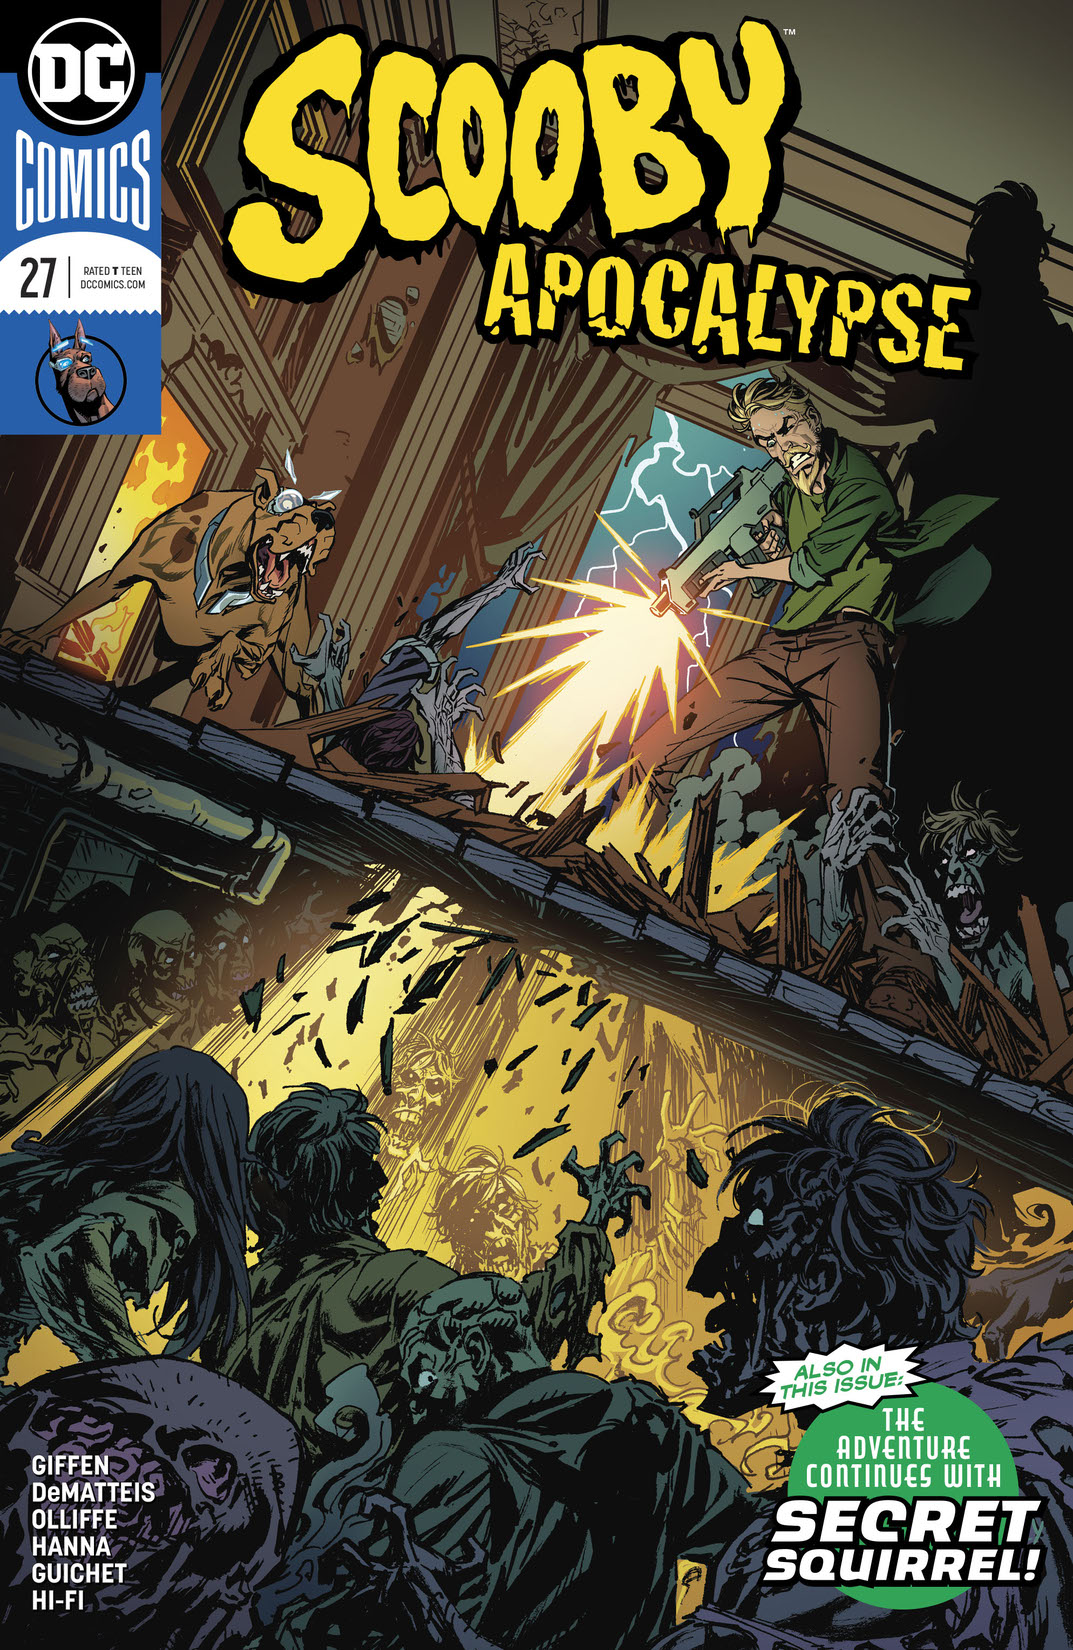 Scooby Apocalypse #27 preview images